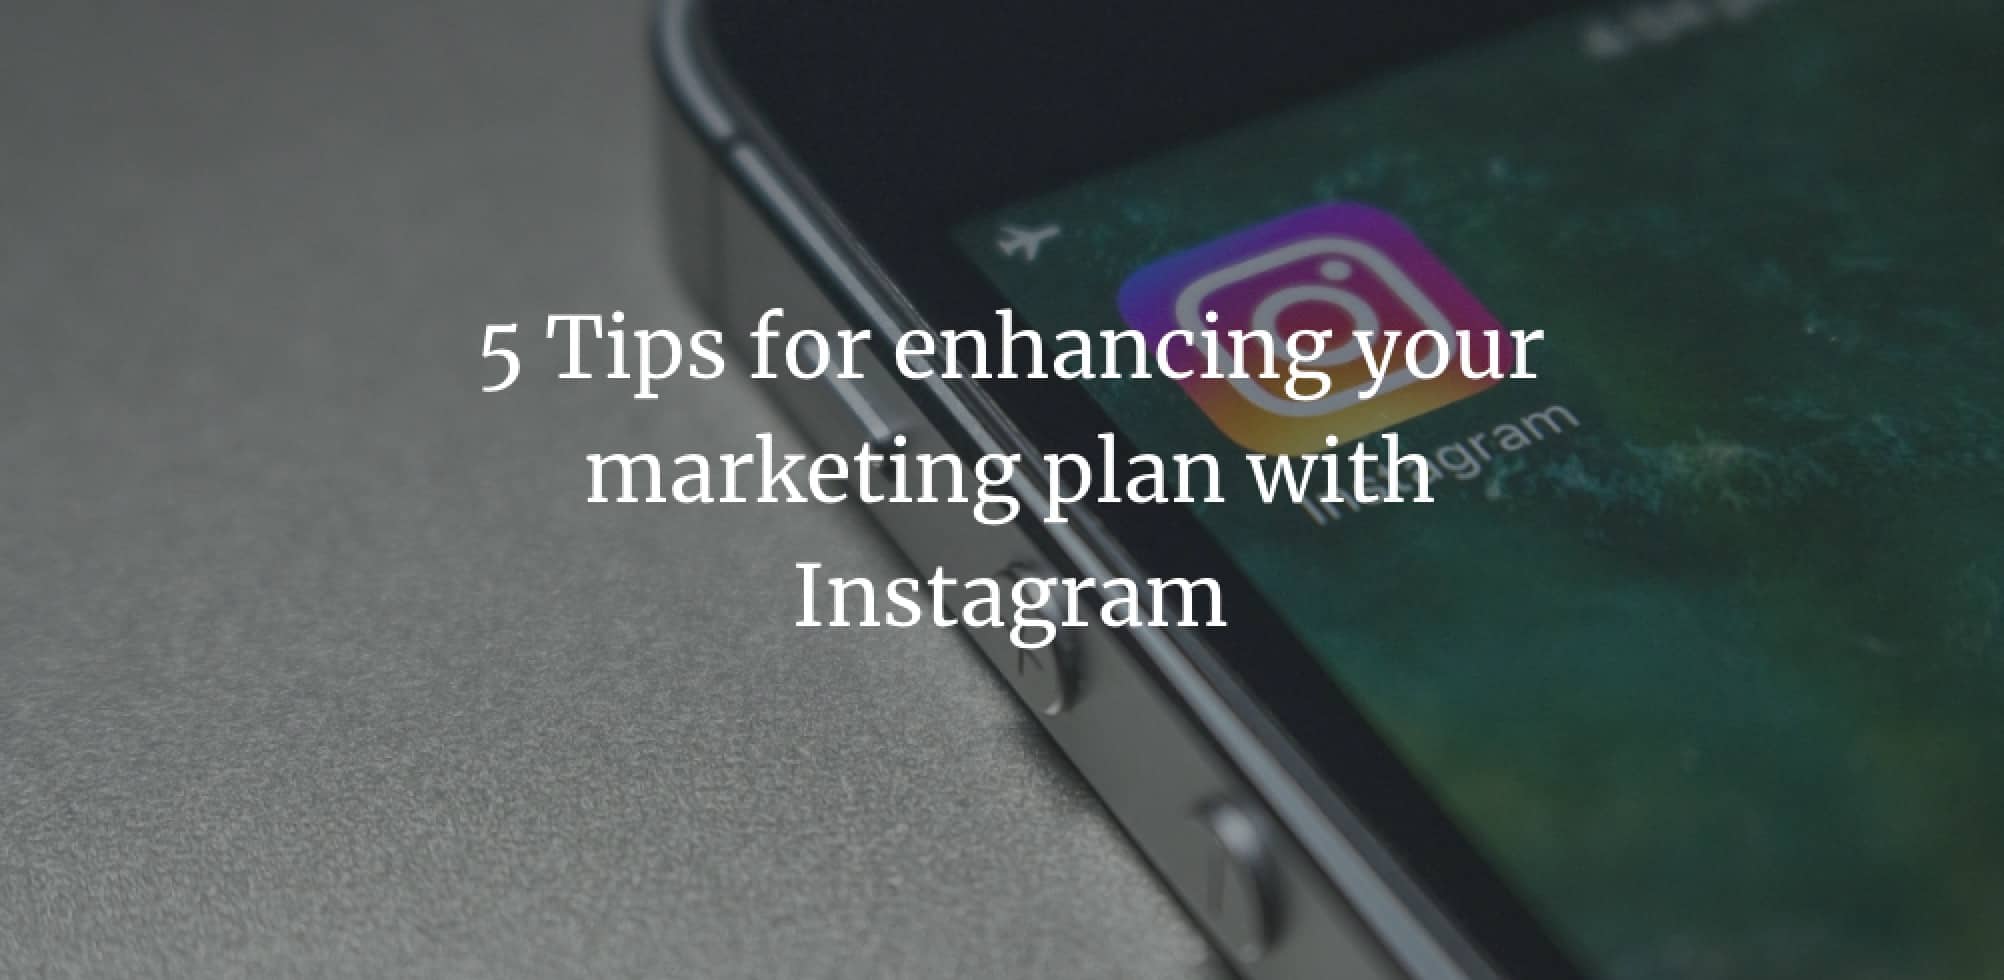 5 Tips for enhancing your marketing plan with Instagram